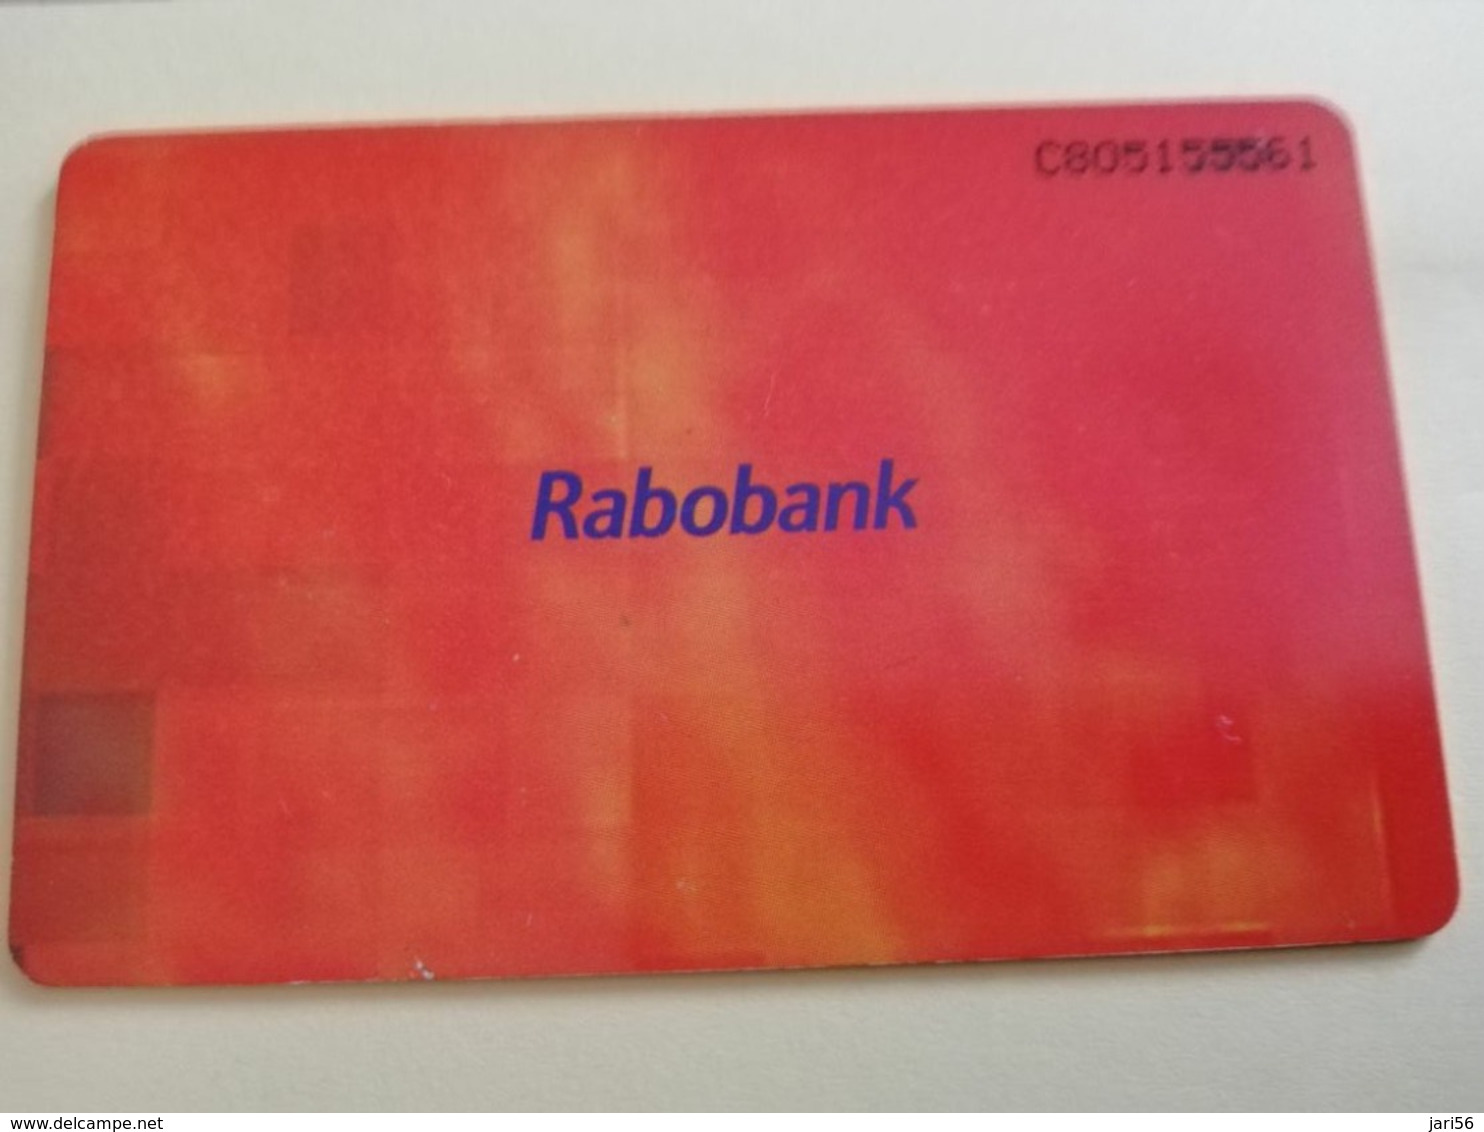 NETHERLANDS  ADVERTISING CHIPCARD HFL 2,50 CRD 132.04 RABOBANK    Fine Used   ** 3169** - Privadas